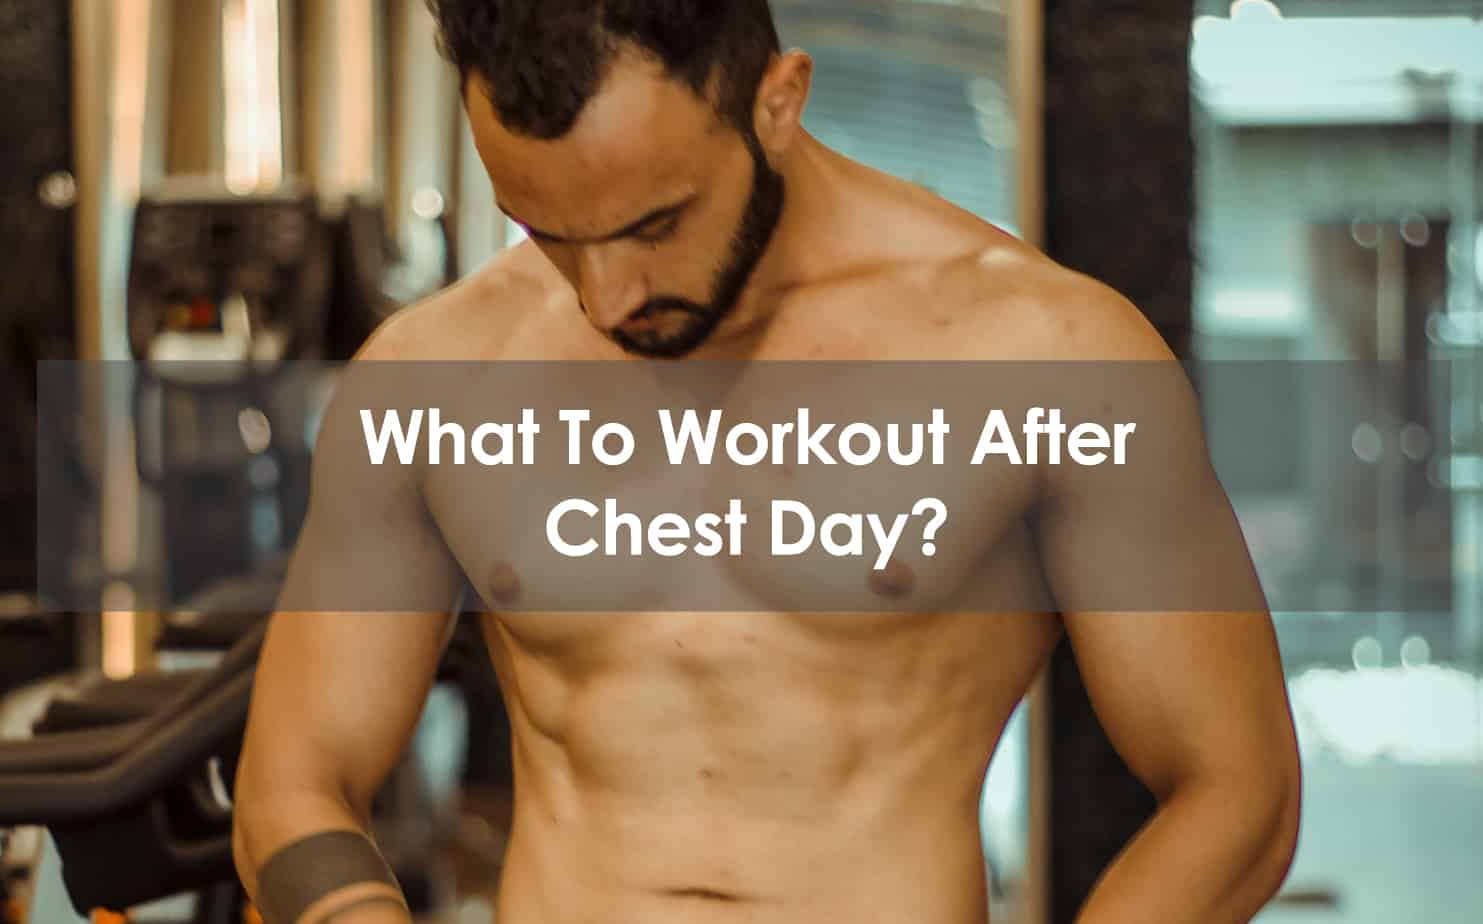 https://www.gym-pact.com/wp-content/uploads/2021/11/what-to-workout-after-chest-day.jpg